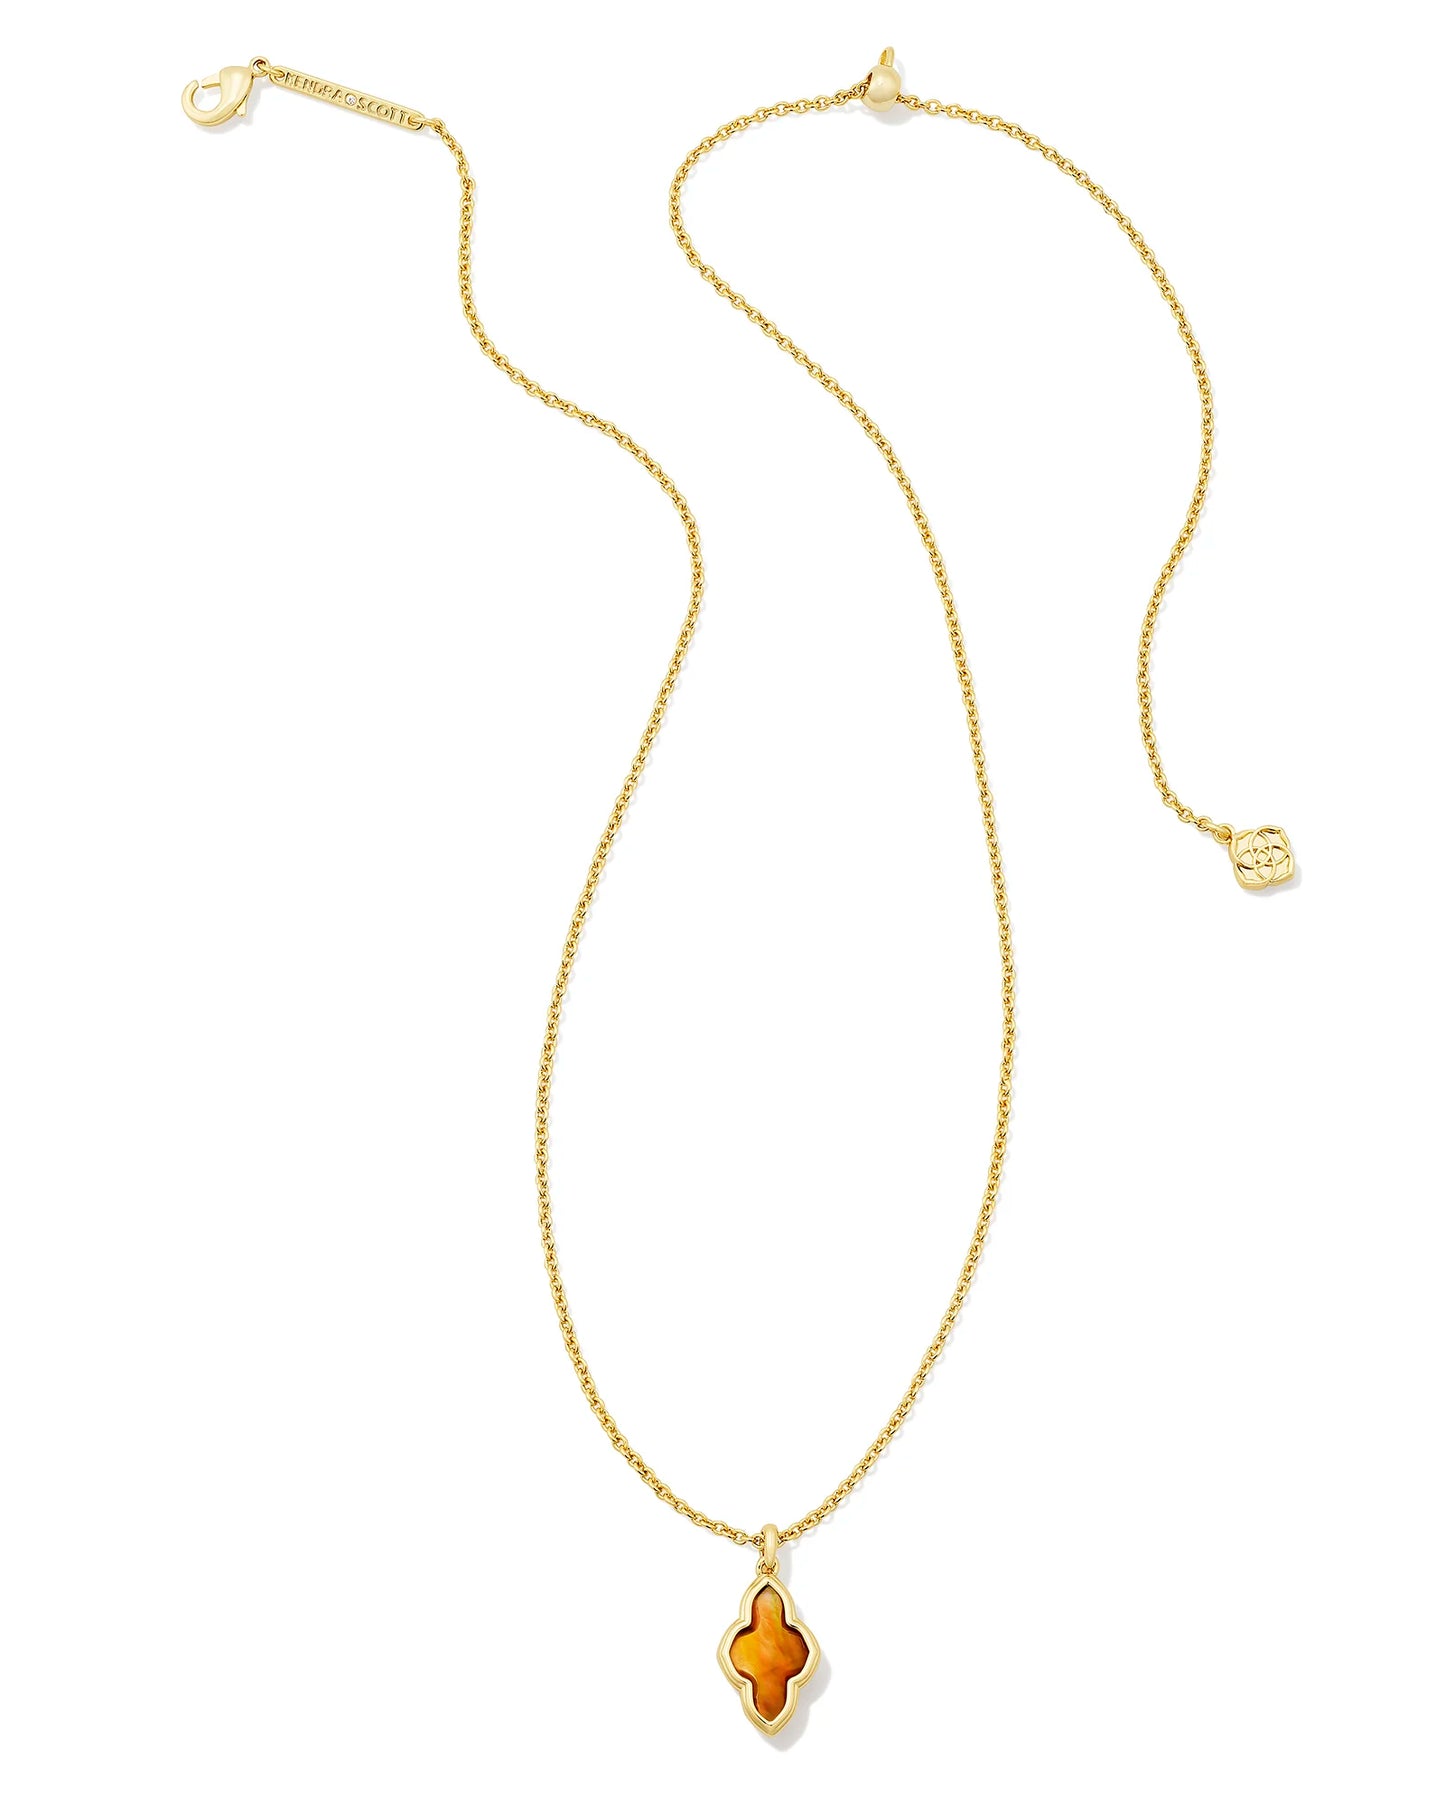 Kendra Scott Framed Abbie Short Pendant Necklace Gold Marble Amber Illusion-Necklaces-Kendra Scott-N00222GLD-The Twisted Chandelier